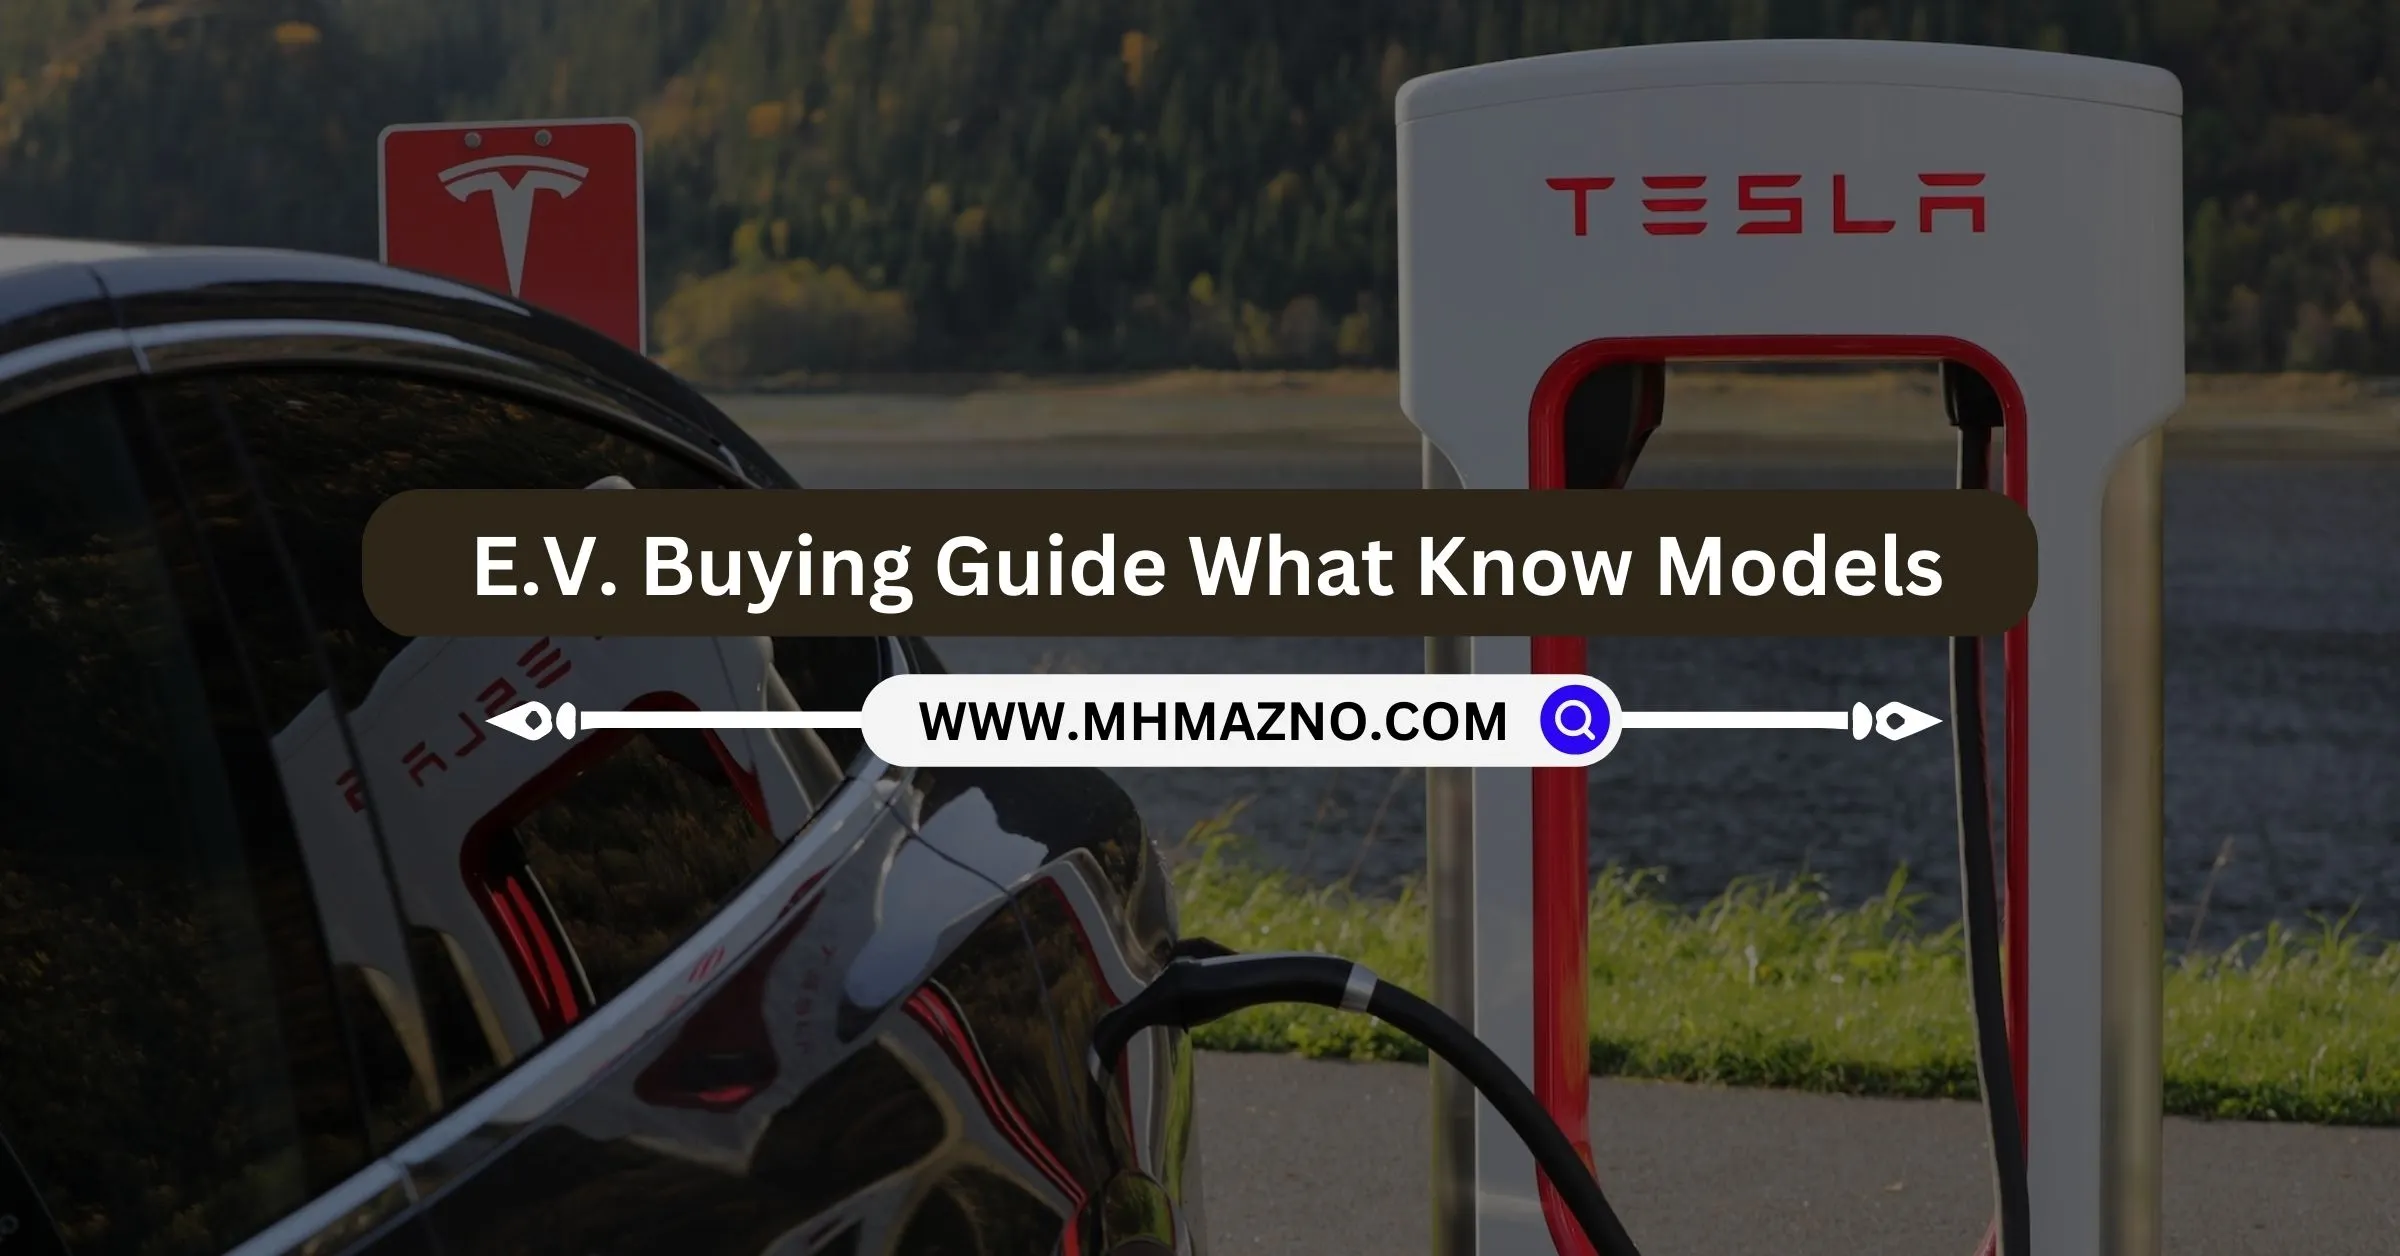 Electric-Vehicle_-E.V.-Buying-Guide-What-Know-Models-55-Points-to-Know